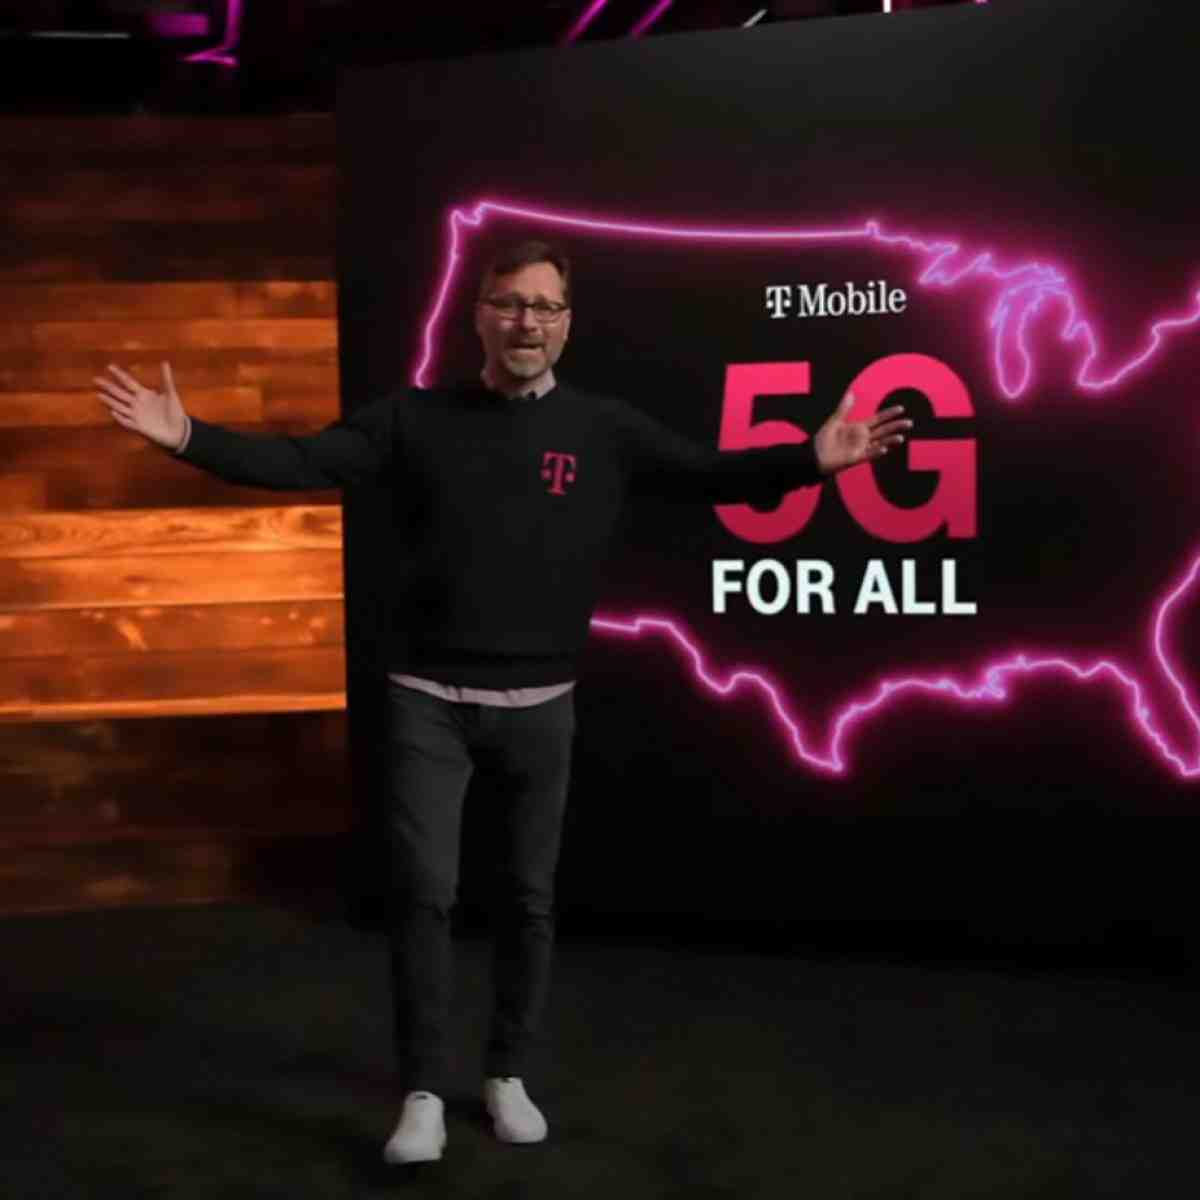 When did T-Mobile get hacked?